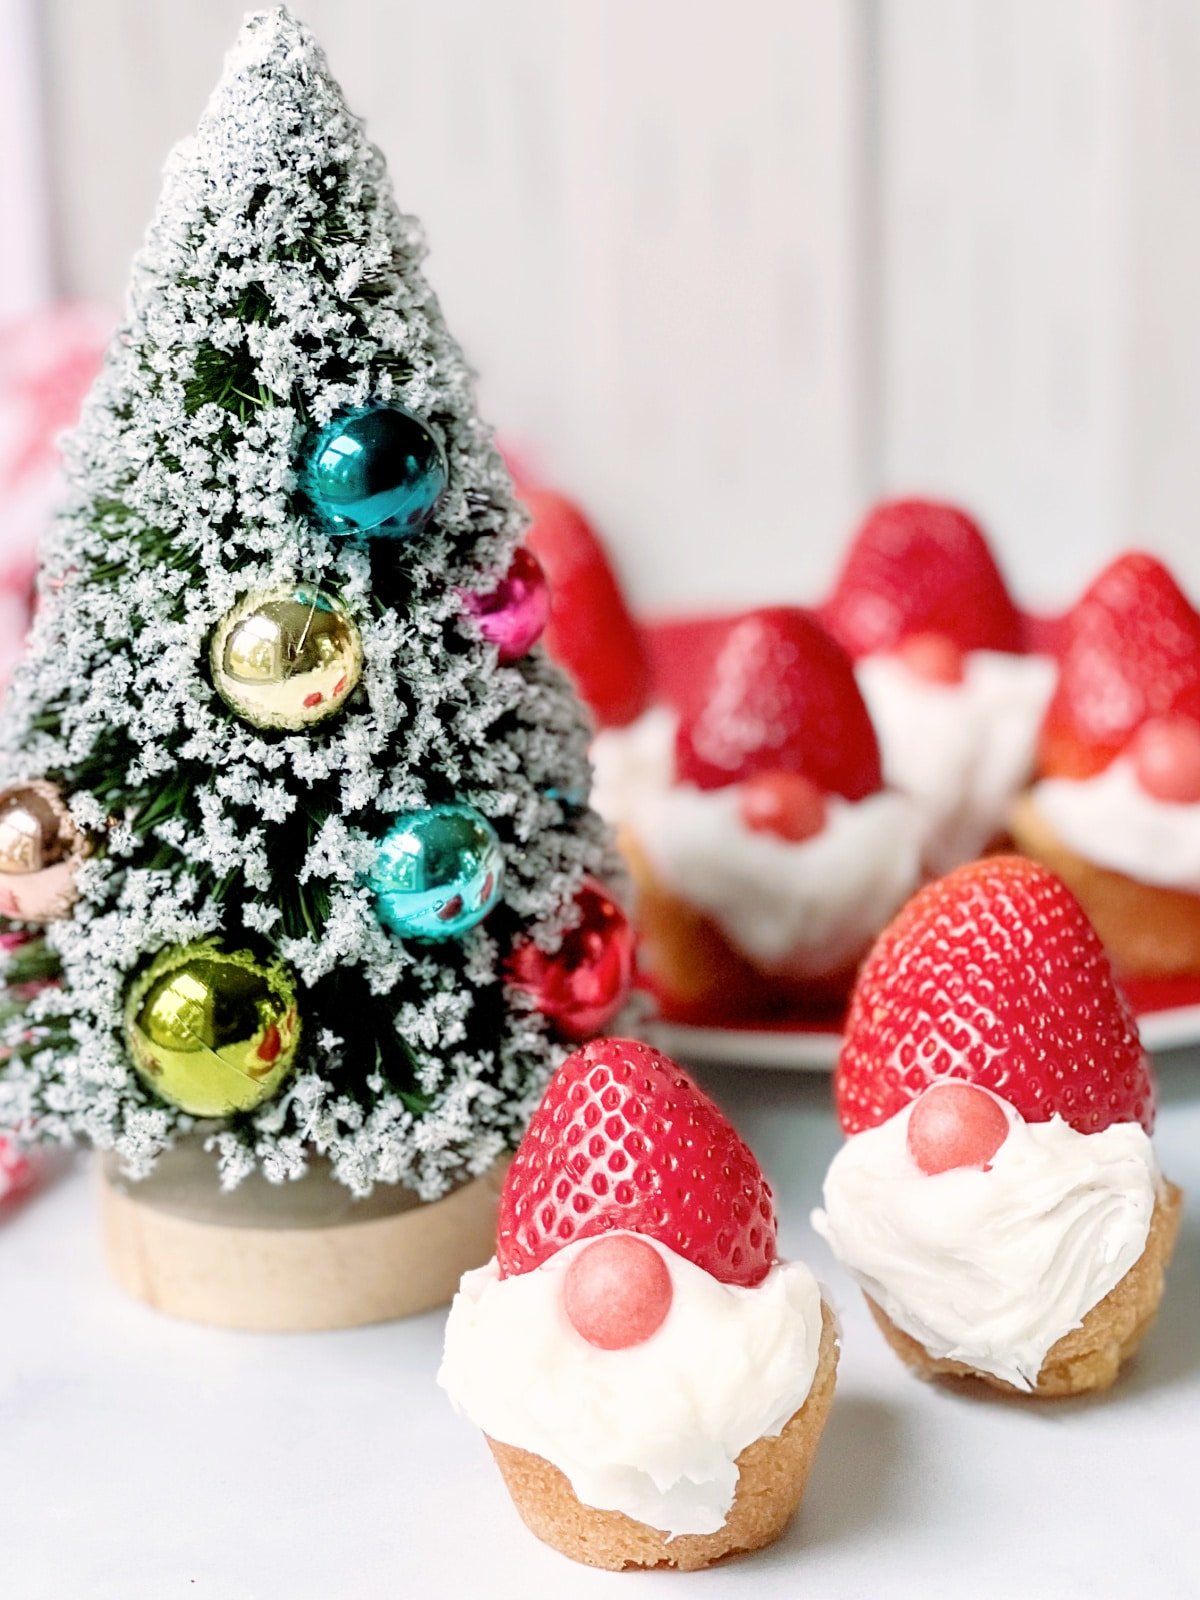 Gnome cookies cups with strawberry hats